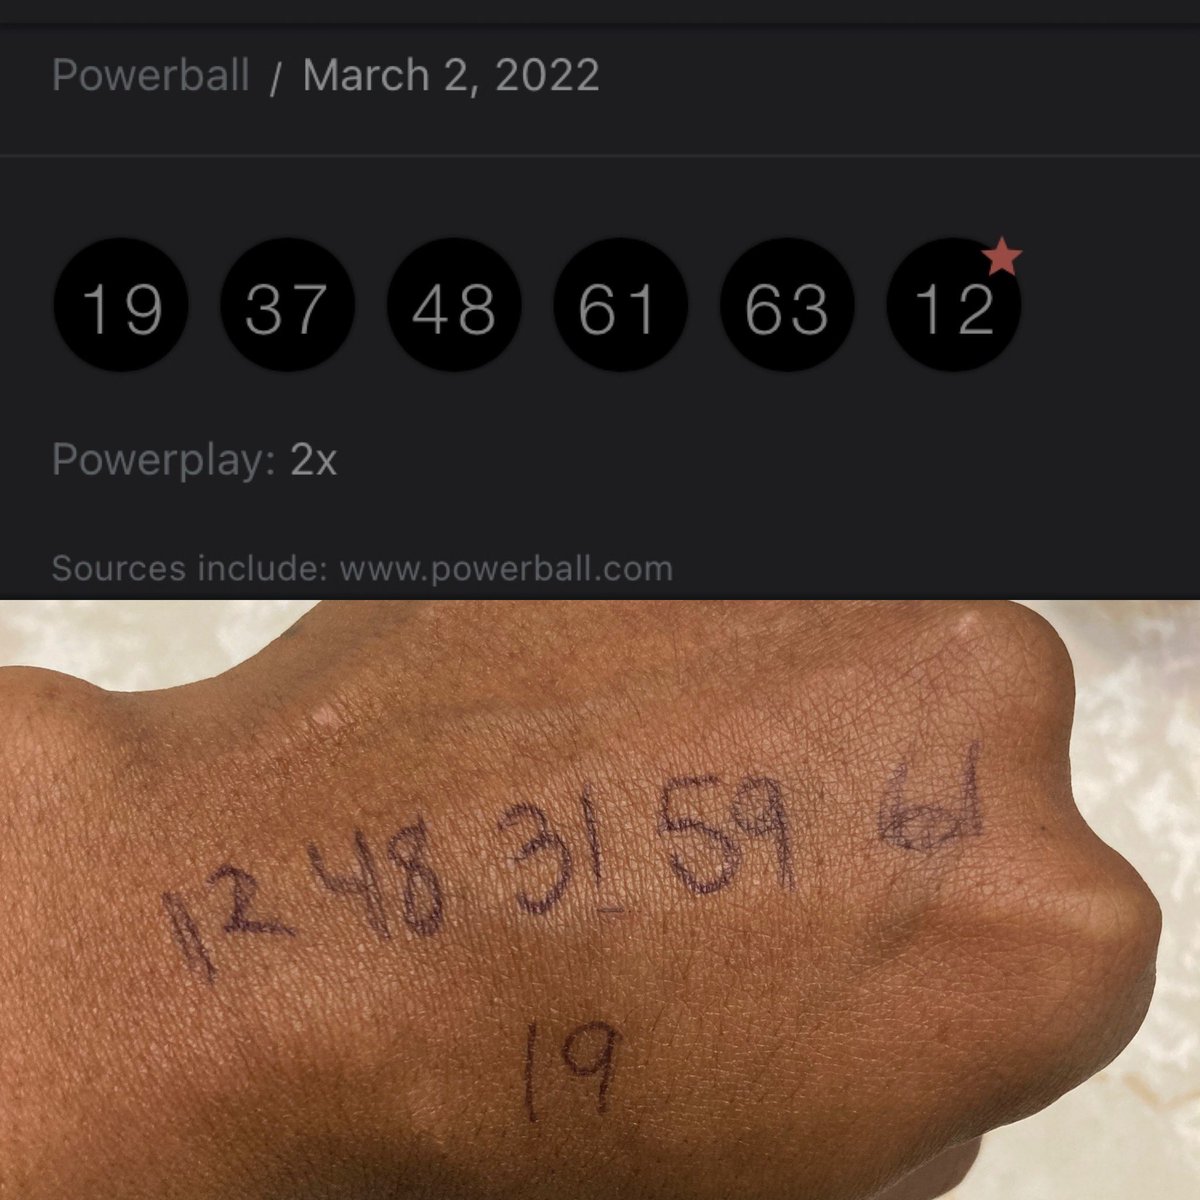 Last night I had some numbers running through my mind so I wrote them down on my hand. I ended up ordering Chinese food I usually don’t eat my whole plate but I did this time I got sluggish and ended up falling asleep wake up check powerball numbers look https://t.co/Avjl0ZBbNQ